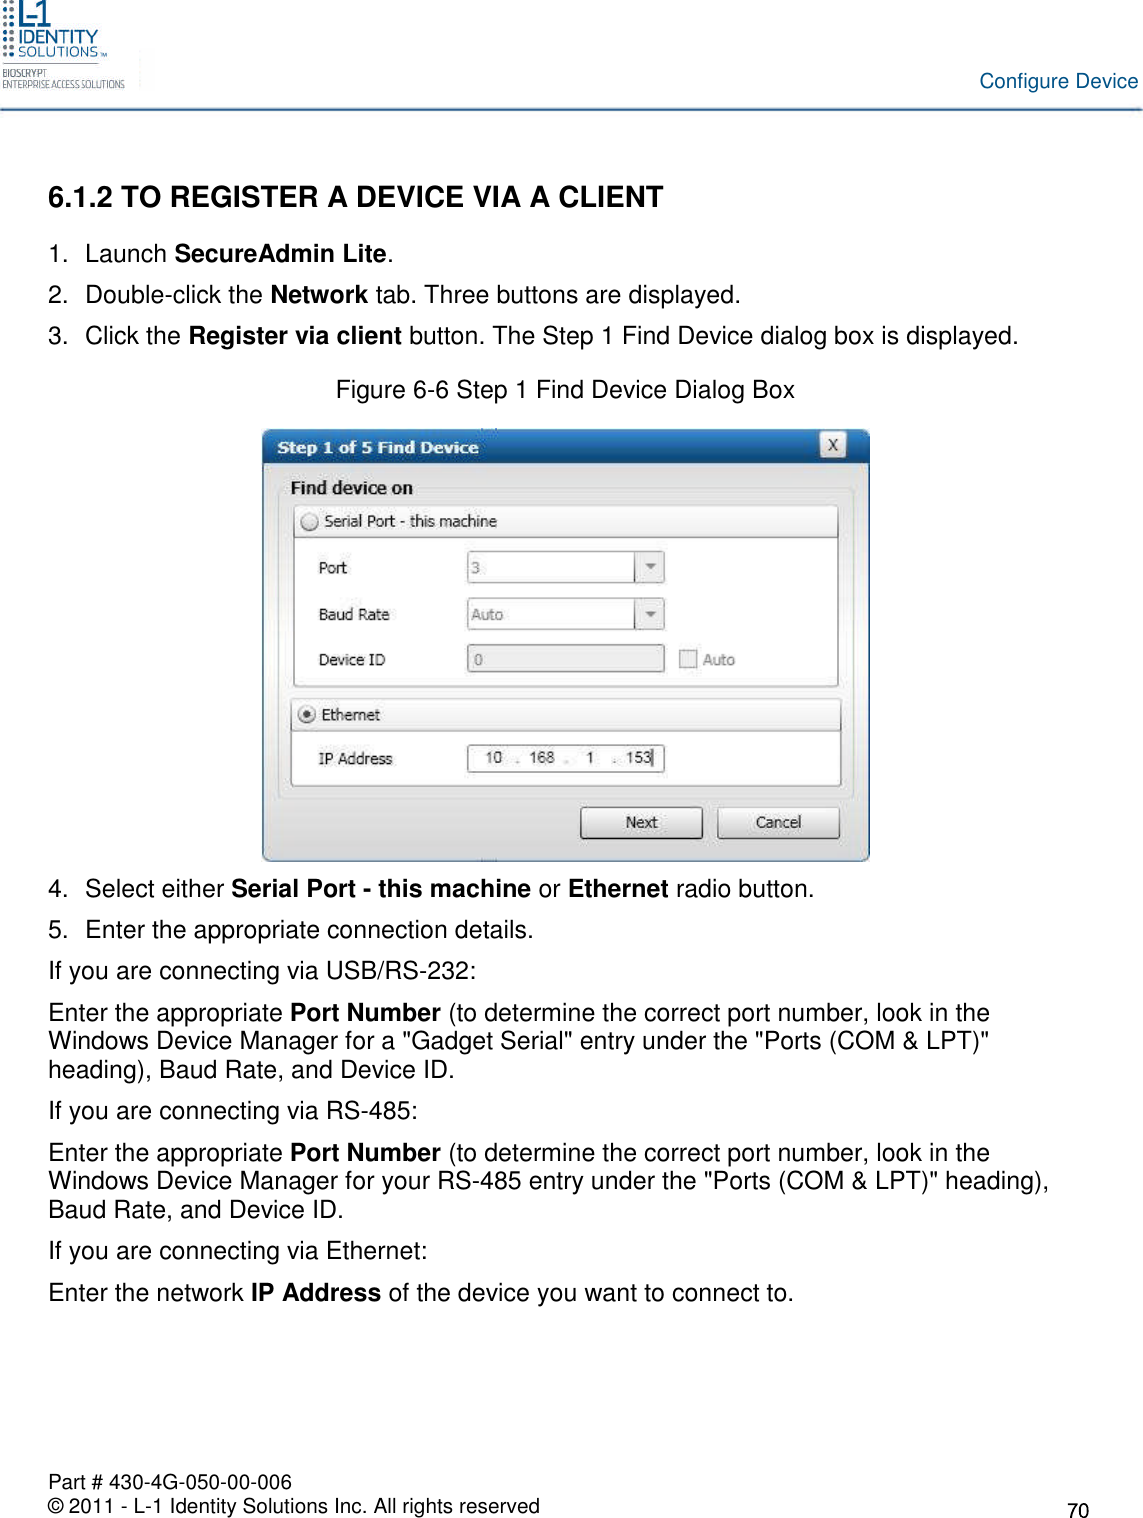 Part # 430-4G-050-00-006© 2011 - L-1 Identity Solutions Inc. All rights reservedConfigure Device6.1.2 TO REGISTER A DEVICE VIA A CLIENT1. Launch SecureAdmin Lite.2. Double-click the Network tab. Three buttons are displayed.3. Click the Register via client button. The Step 1 Find Device dialog box is displayed.Figure 6-6 Step 1 Find Device Dialog Box4. Select either Serial Port - this machine or Ethernet radio button.5. Enter the appropriate connection details.If you are connecting via USB/RS-232:Enter the appropriate Port Number (to determine the correct port number, look in theWindows Device Manager for a &quot;Gadget Serial&quot; entry under the &quot;Ports (COM &amp; LPT)&quot;heading), Baud Rate, and Device ID.If you are connecting via RS-485:Enter the appropriate Port Number (to determine the correct port number, look in theWindows Device Manager for your RS-485 entry under the &quot;Ports (COM &amp; LPT)&quot; heading),Baud Rate, and Device ID.If you are connecting via Ethernet:Enter the network IP Address of the device you want to connect to.